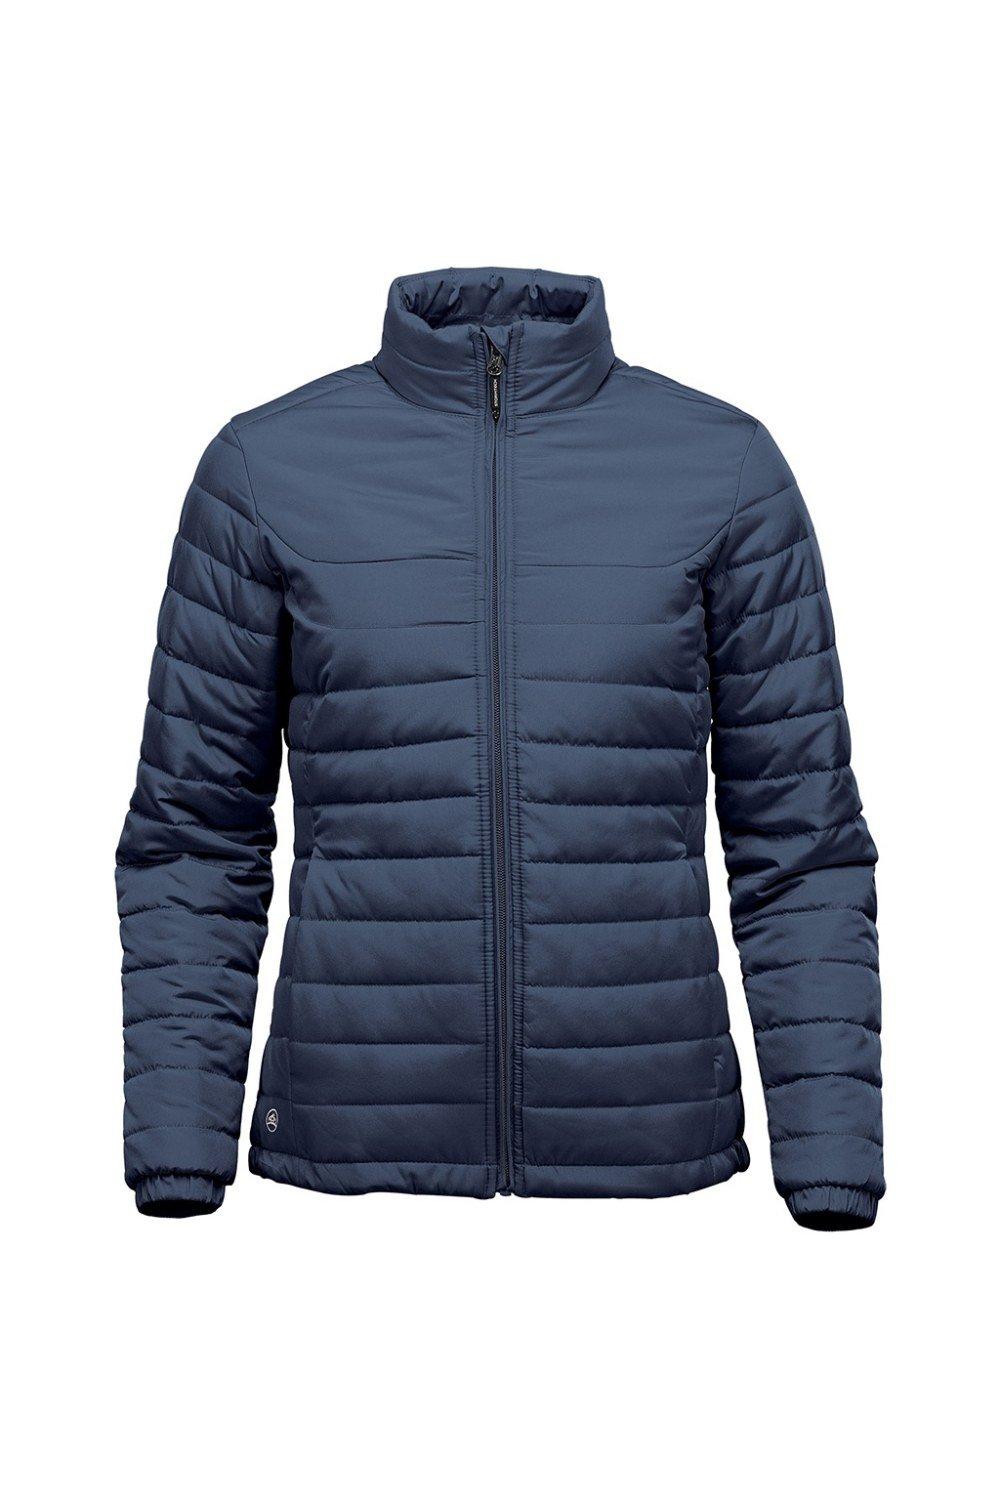 Stormtech Women's Nautilus Quilted Padded Jacket|Size: XXL|navy